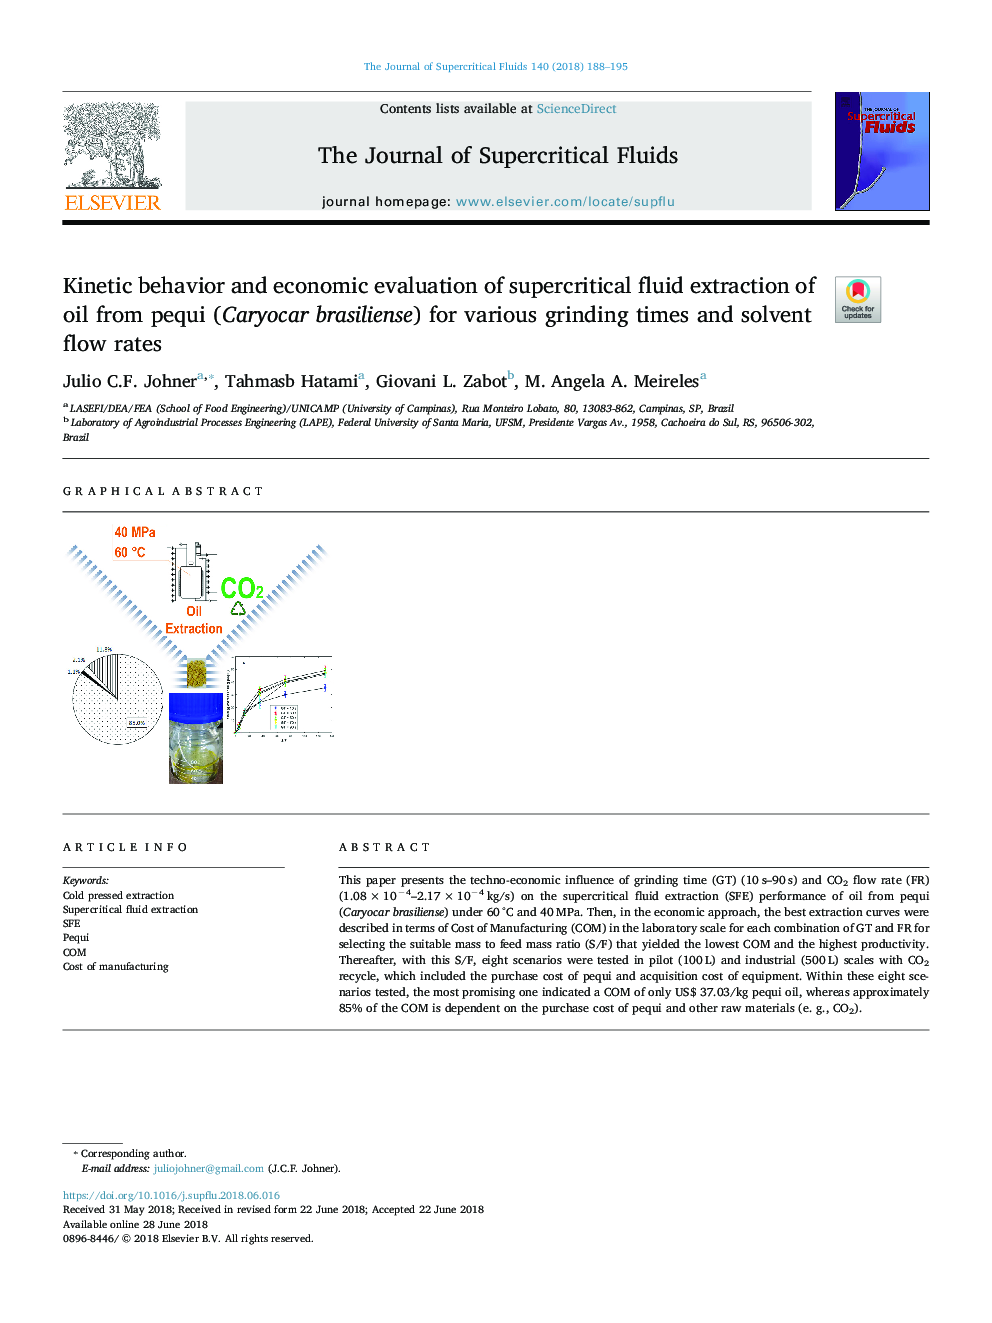 Kinetic behavior and economic evaluation of supercritical fluid extraction of oil from pequi (Caryocar brasiliense) for various grinding times and solvent flow rates